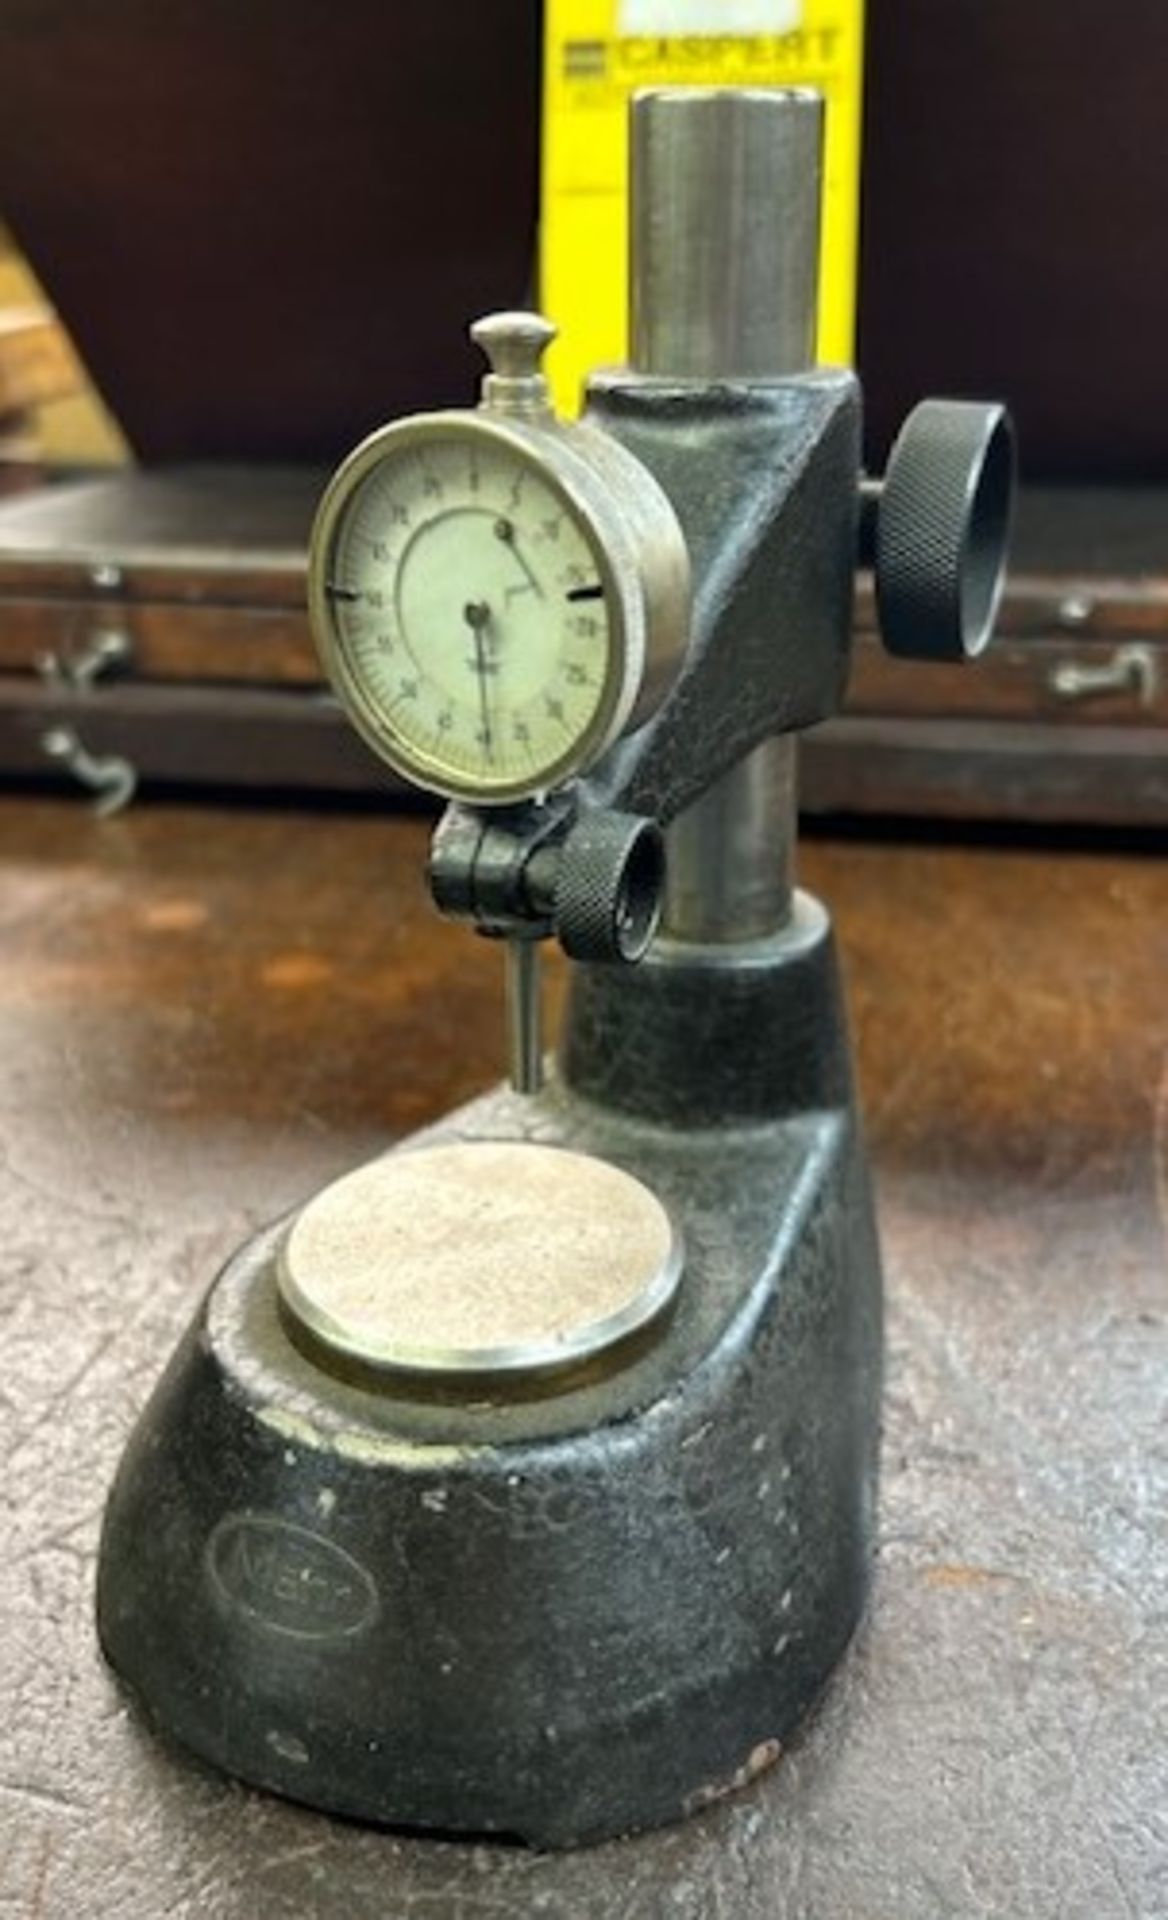 Dial Indicator Stand